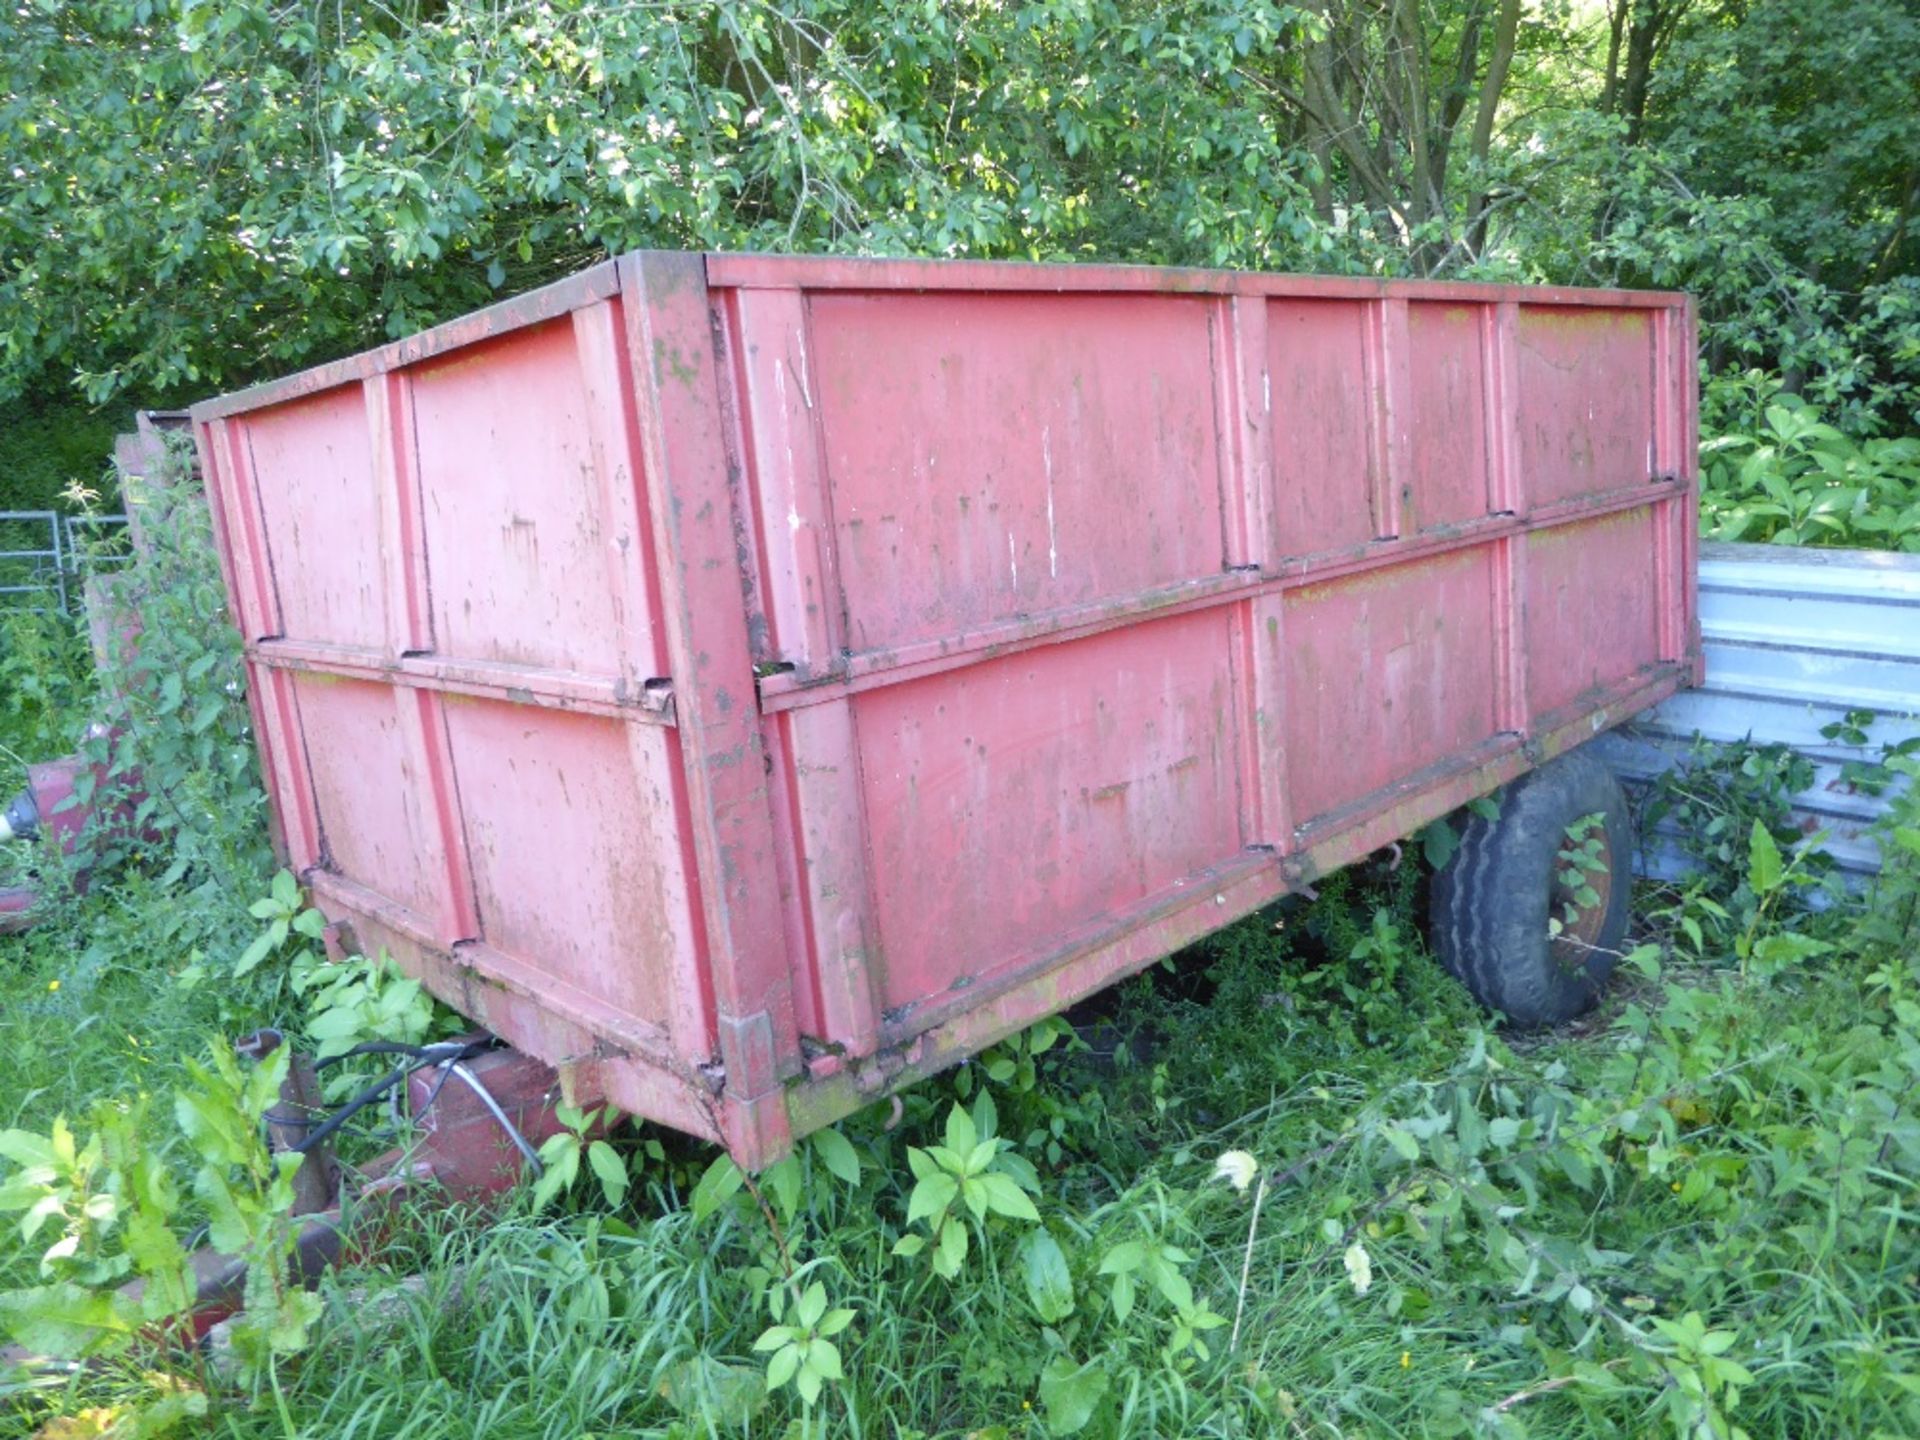 Weeks Trailer for a Massey Ferguson, 1978. A single axle tipping trailer. Max gross weight, 4 ¾